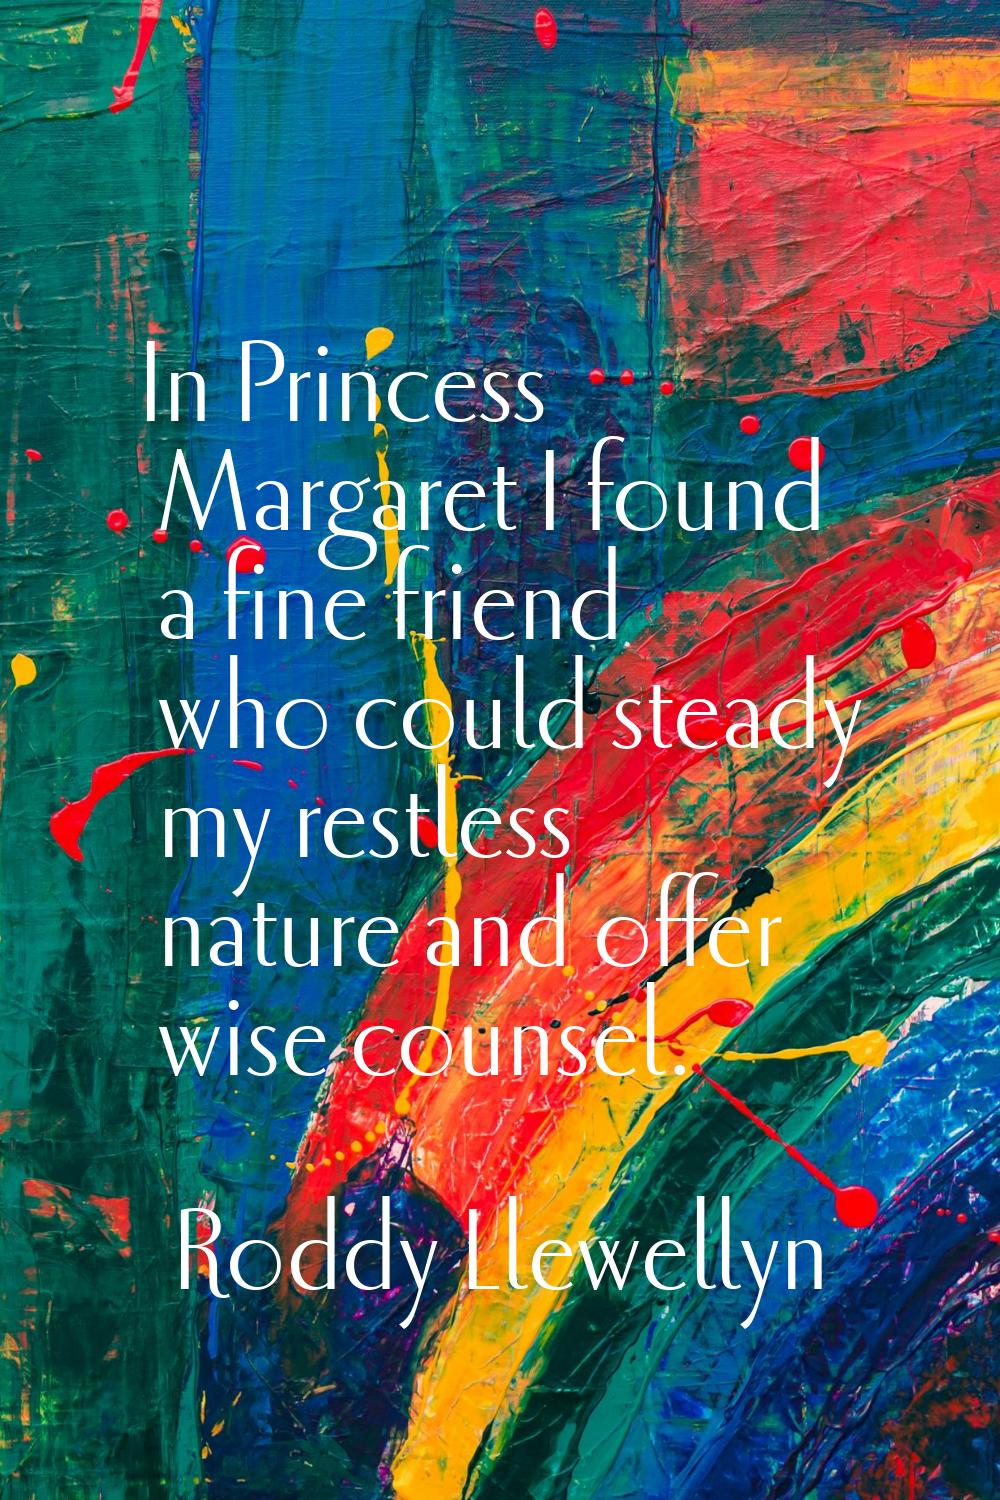 In Princess Margaret I found a fine friend who could steady my restless nature and offer wise couns